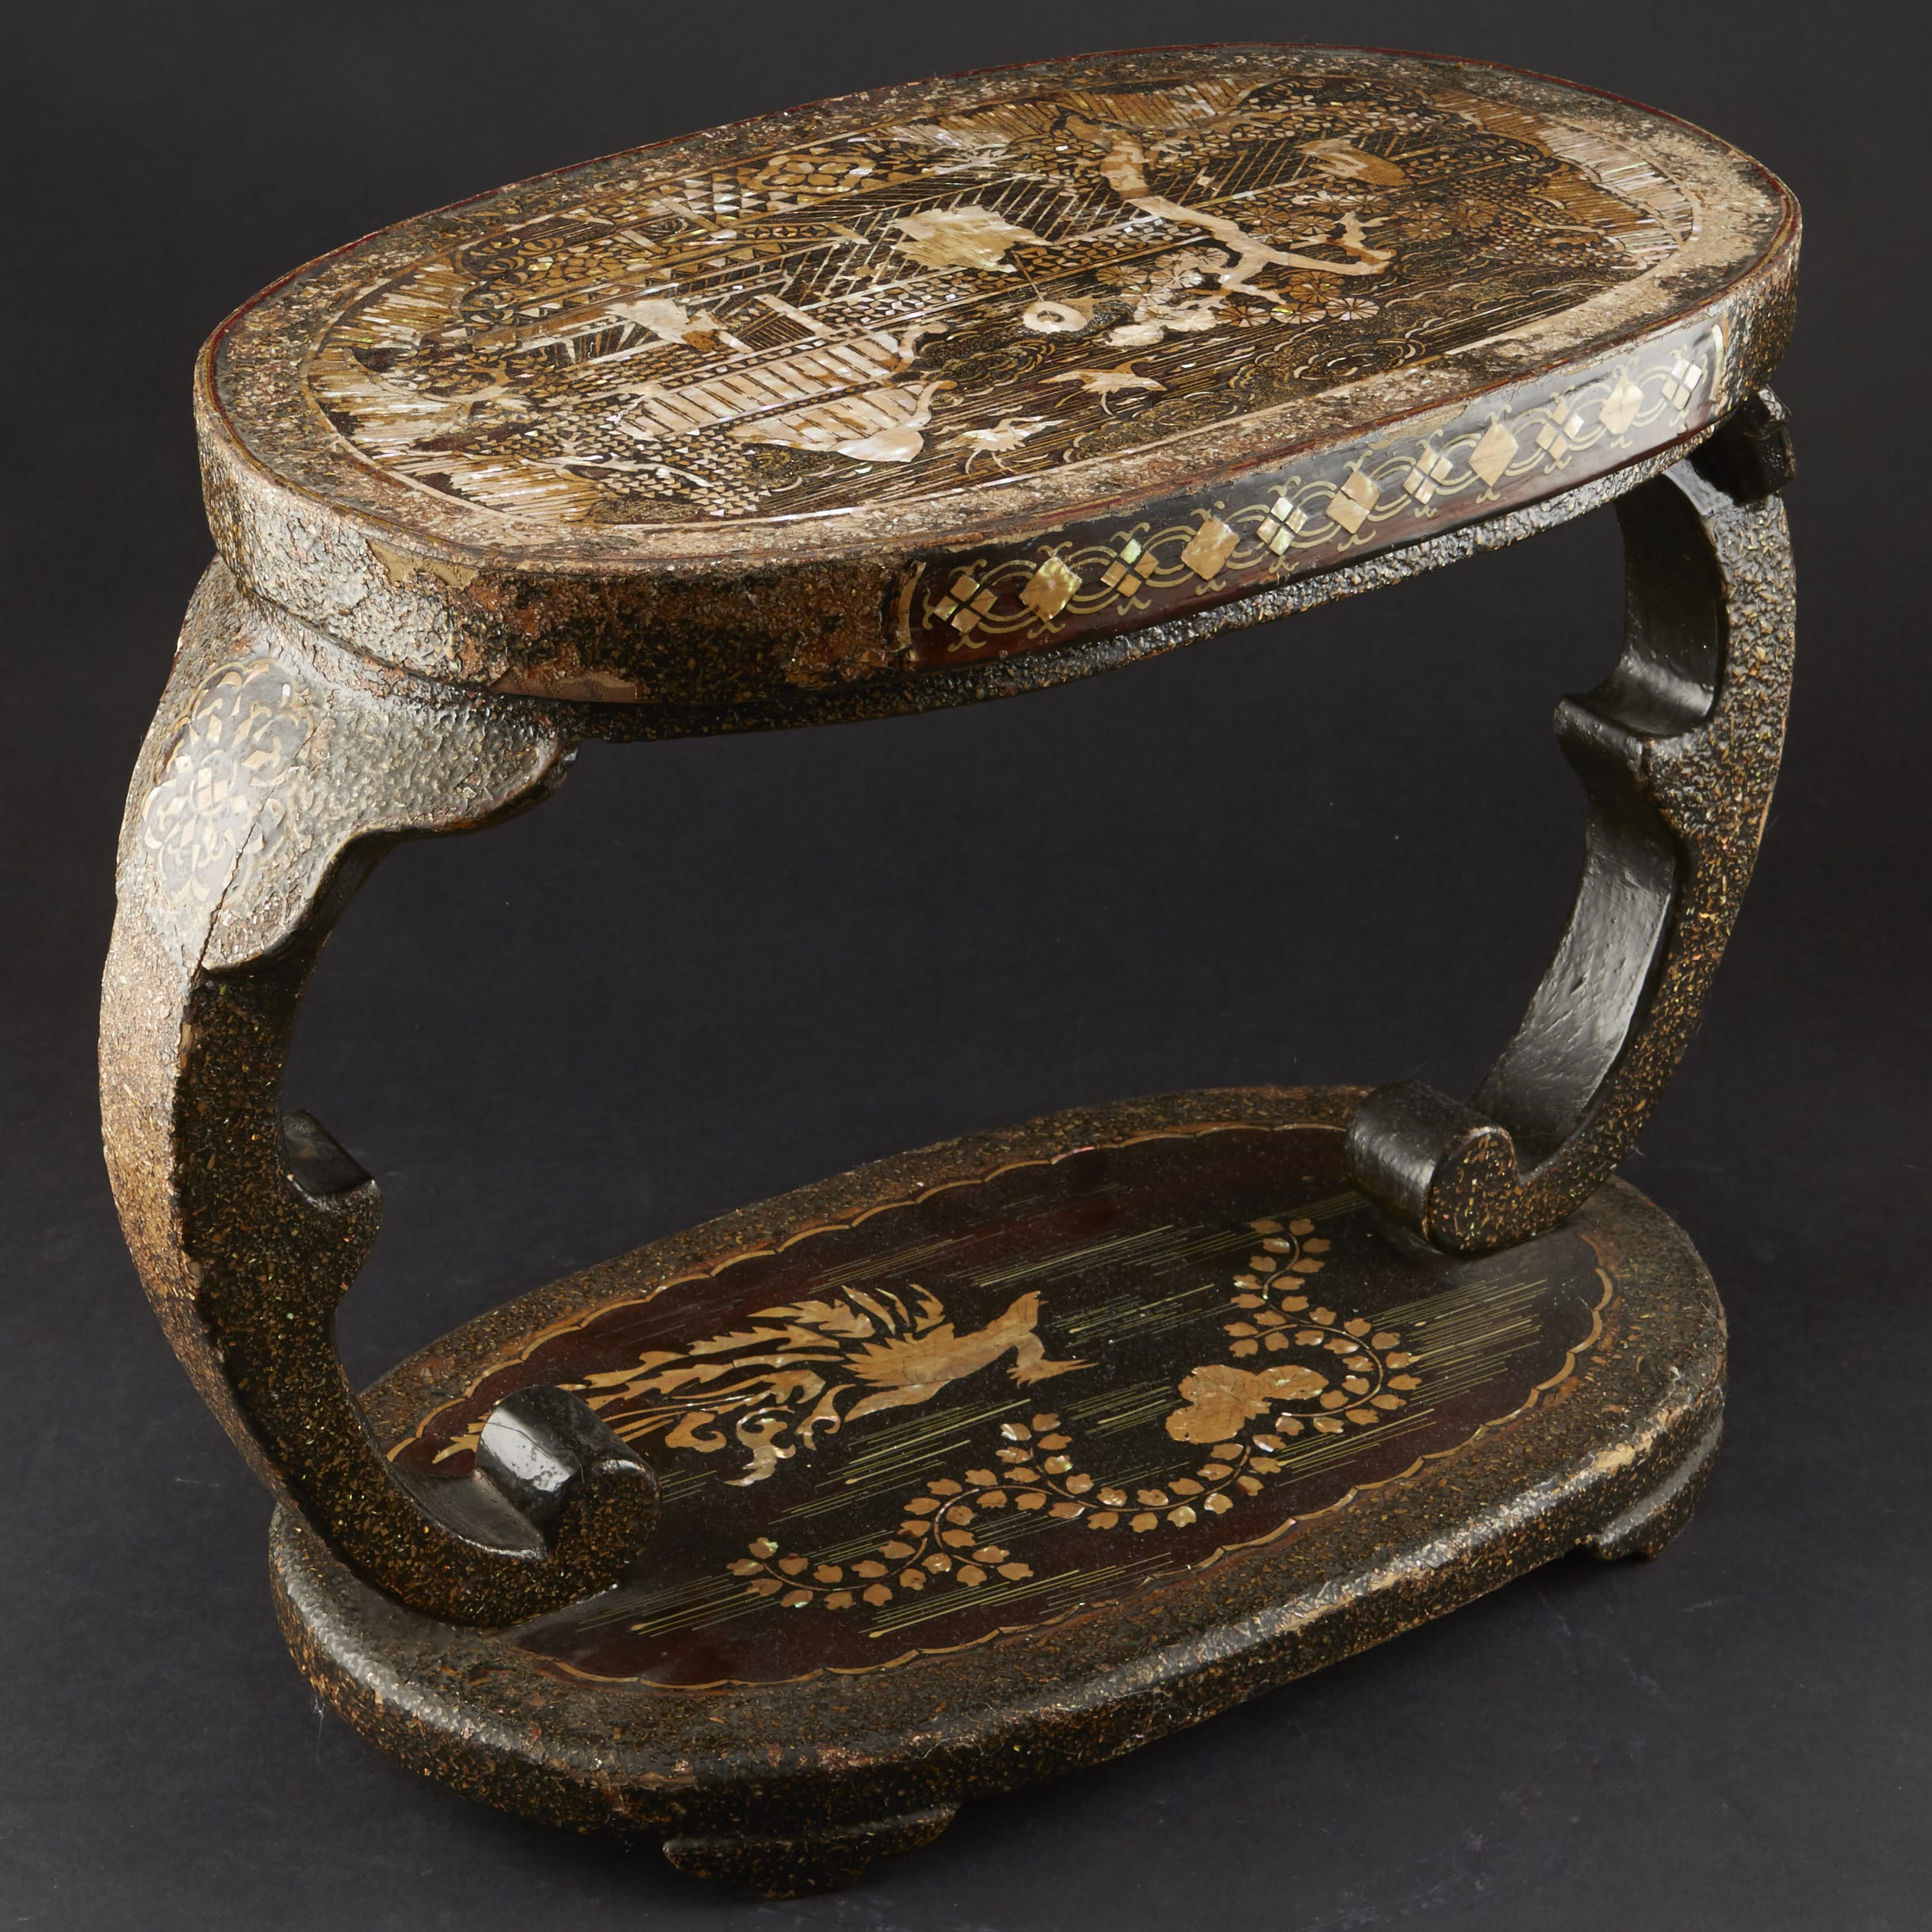 Lot 054: Japanese  Lacquer and Mother of Pearl Stool